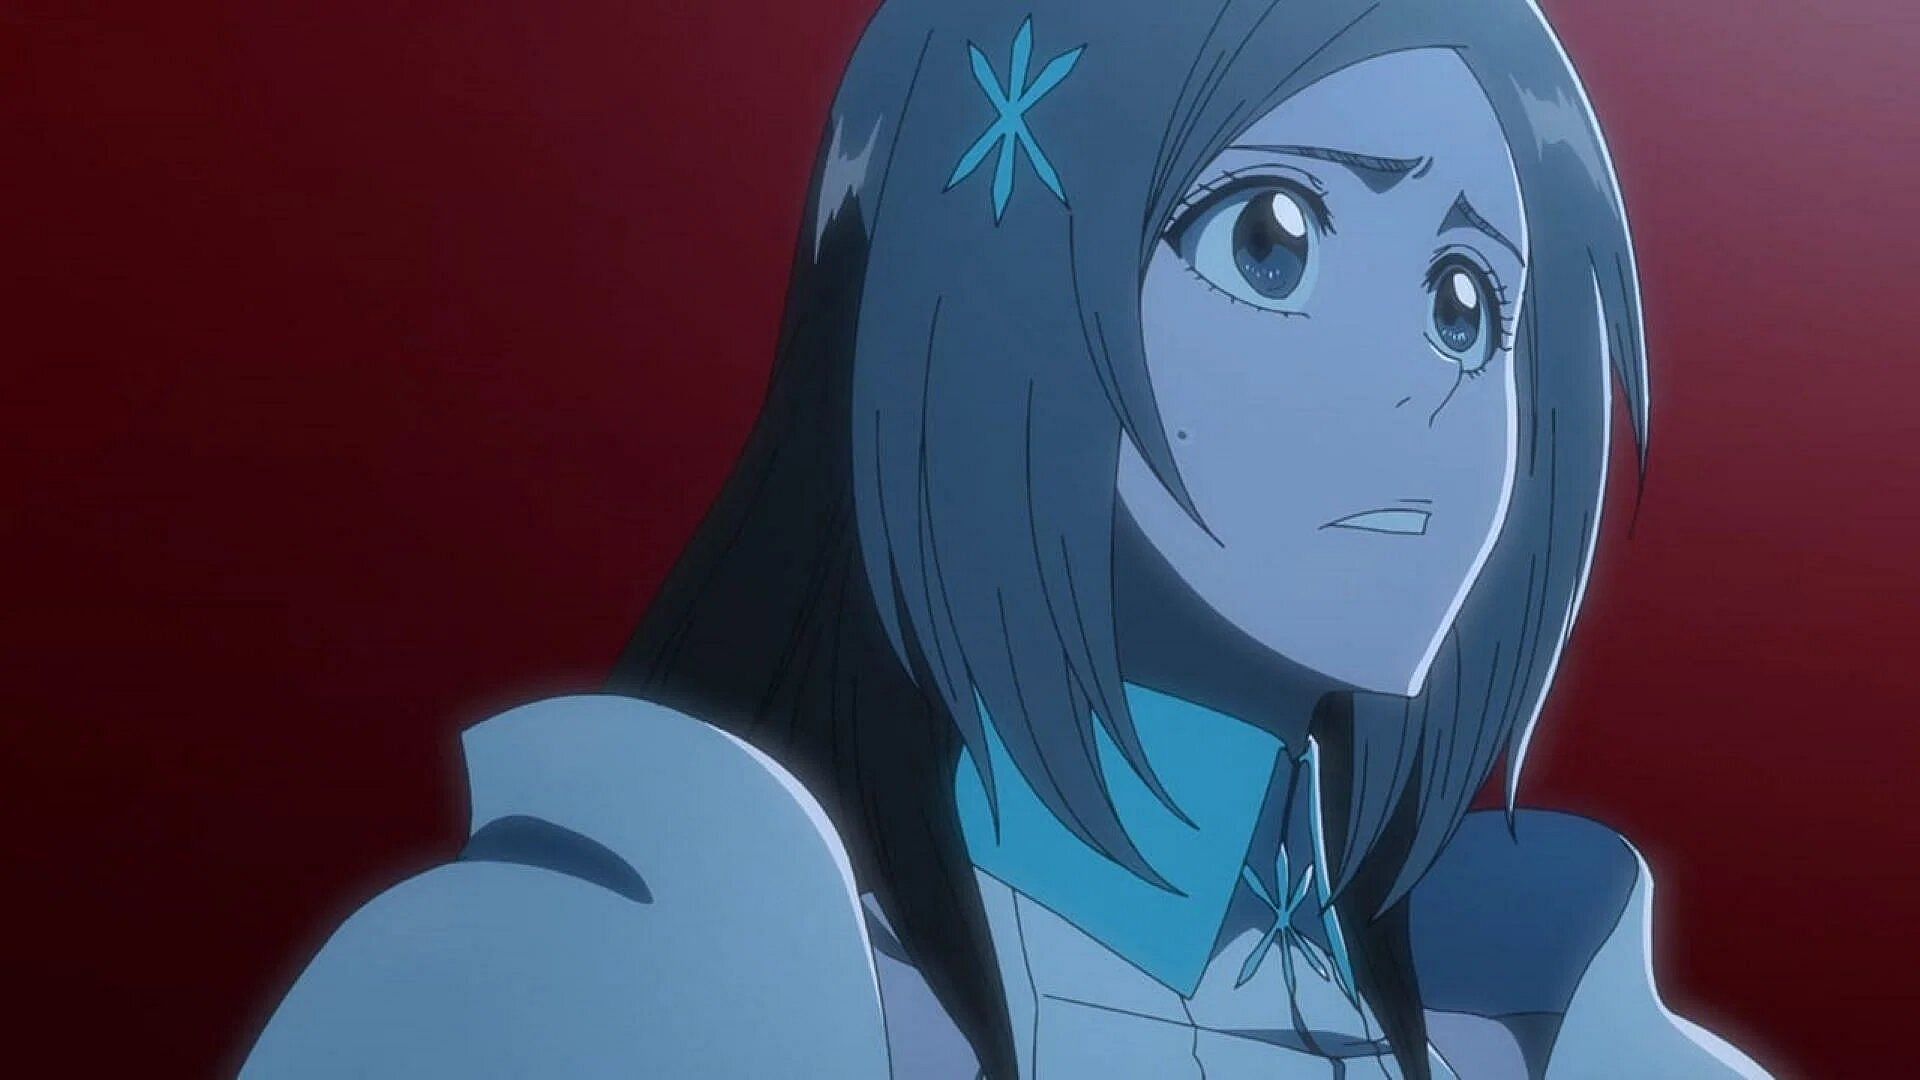 Orihime is one of the most controversial anime characters in shonen (Image via Studio Pierrot)